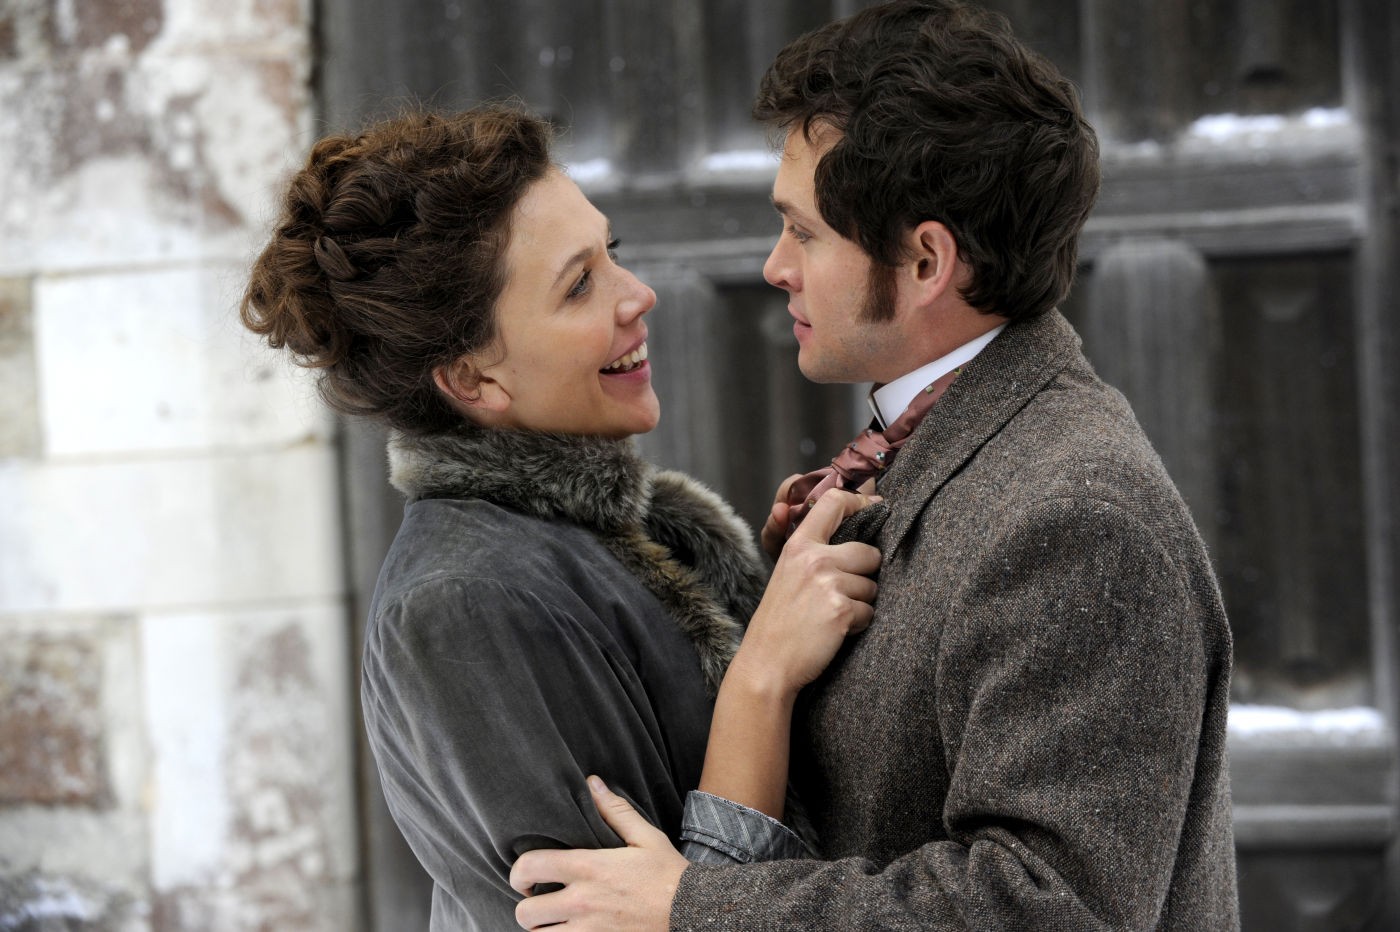 Maggie Gyllenhaal stars as Charlotte Dalrymple and Hugh Dancy stars as Mortimer Granville in Sony Pictures Classics' Hysteria (2012)